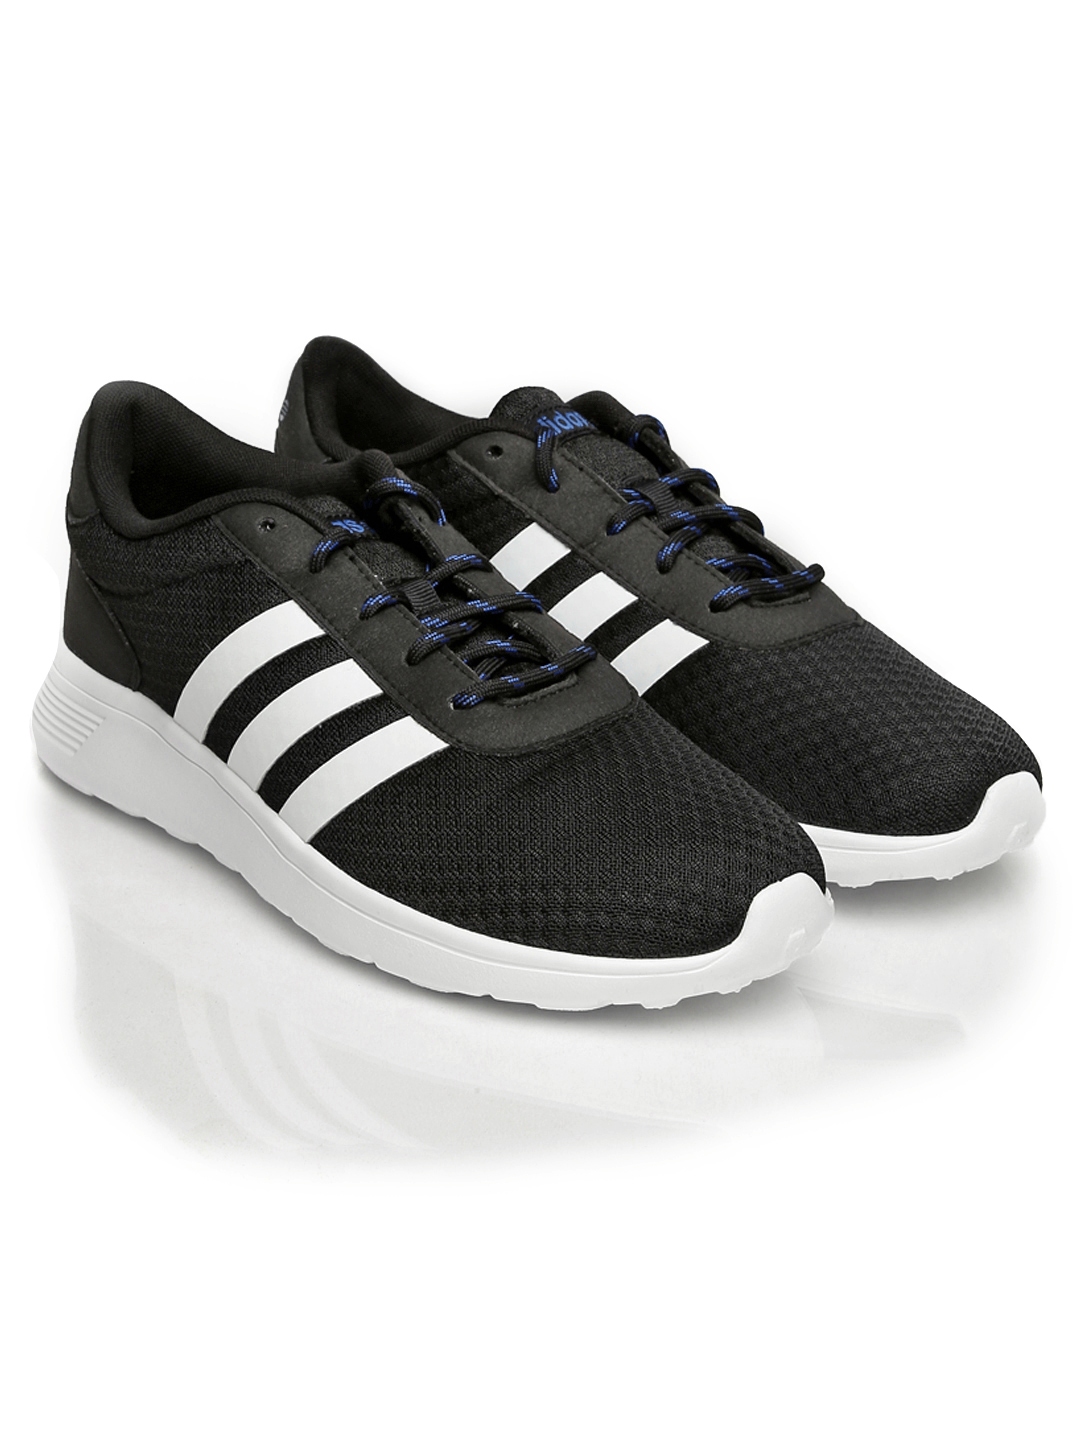 ADIDAS NEO Men Black Lite Racer Casual Shoes - Casual Shoes for 655793 | Myntra